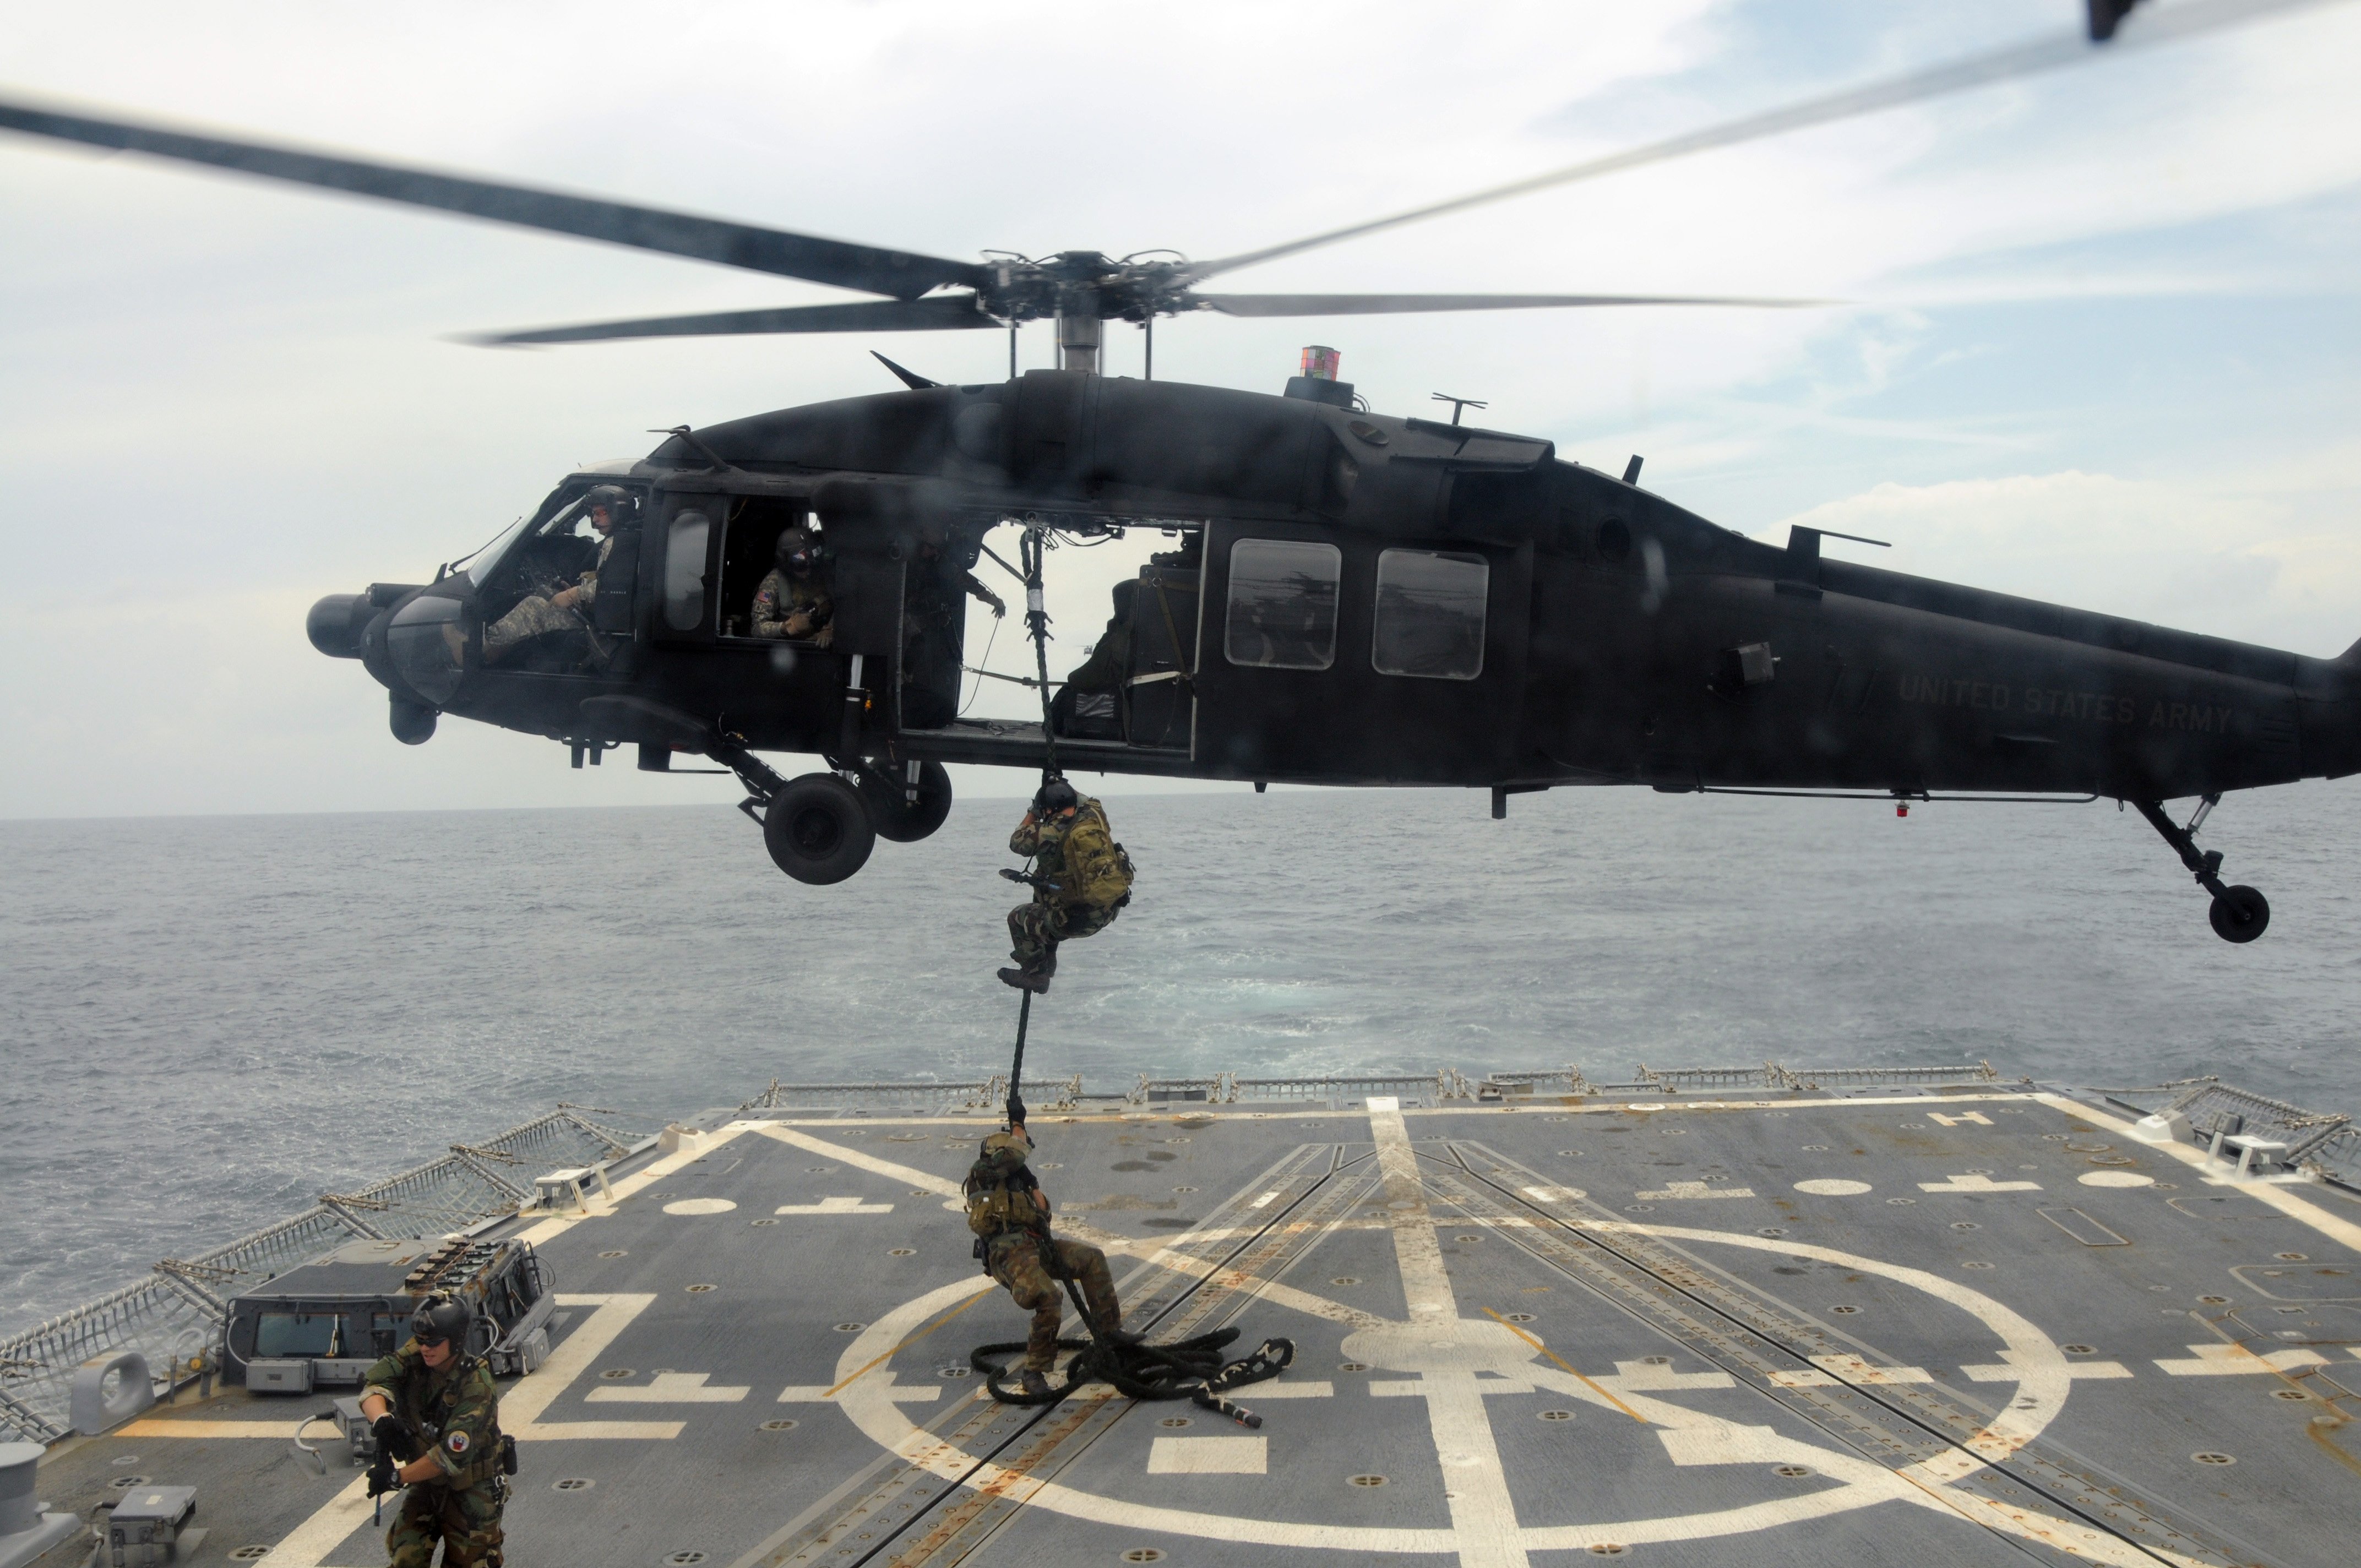 seal, Team, Military, Warrior, Soldier, Action, Fighting, Crime, Drama, Navy, 1stsix, Weapon, Rifle, Assault, Helicopter Wallpaper